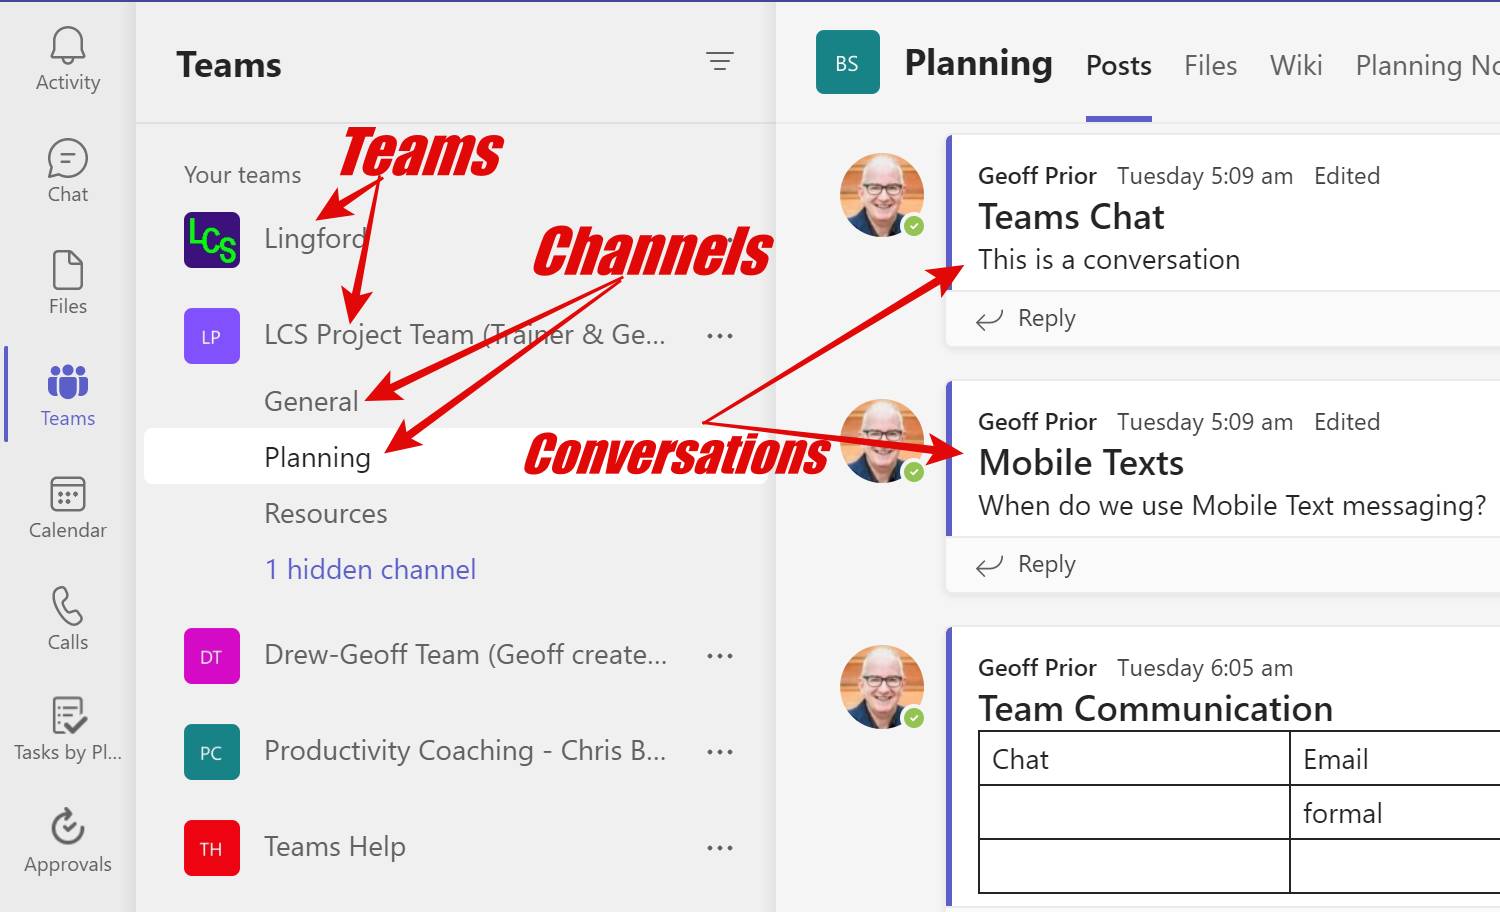 Screenshot of Microsoft Teams Layout showing TEams Channels and Conversations